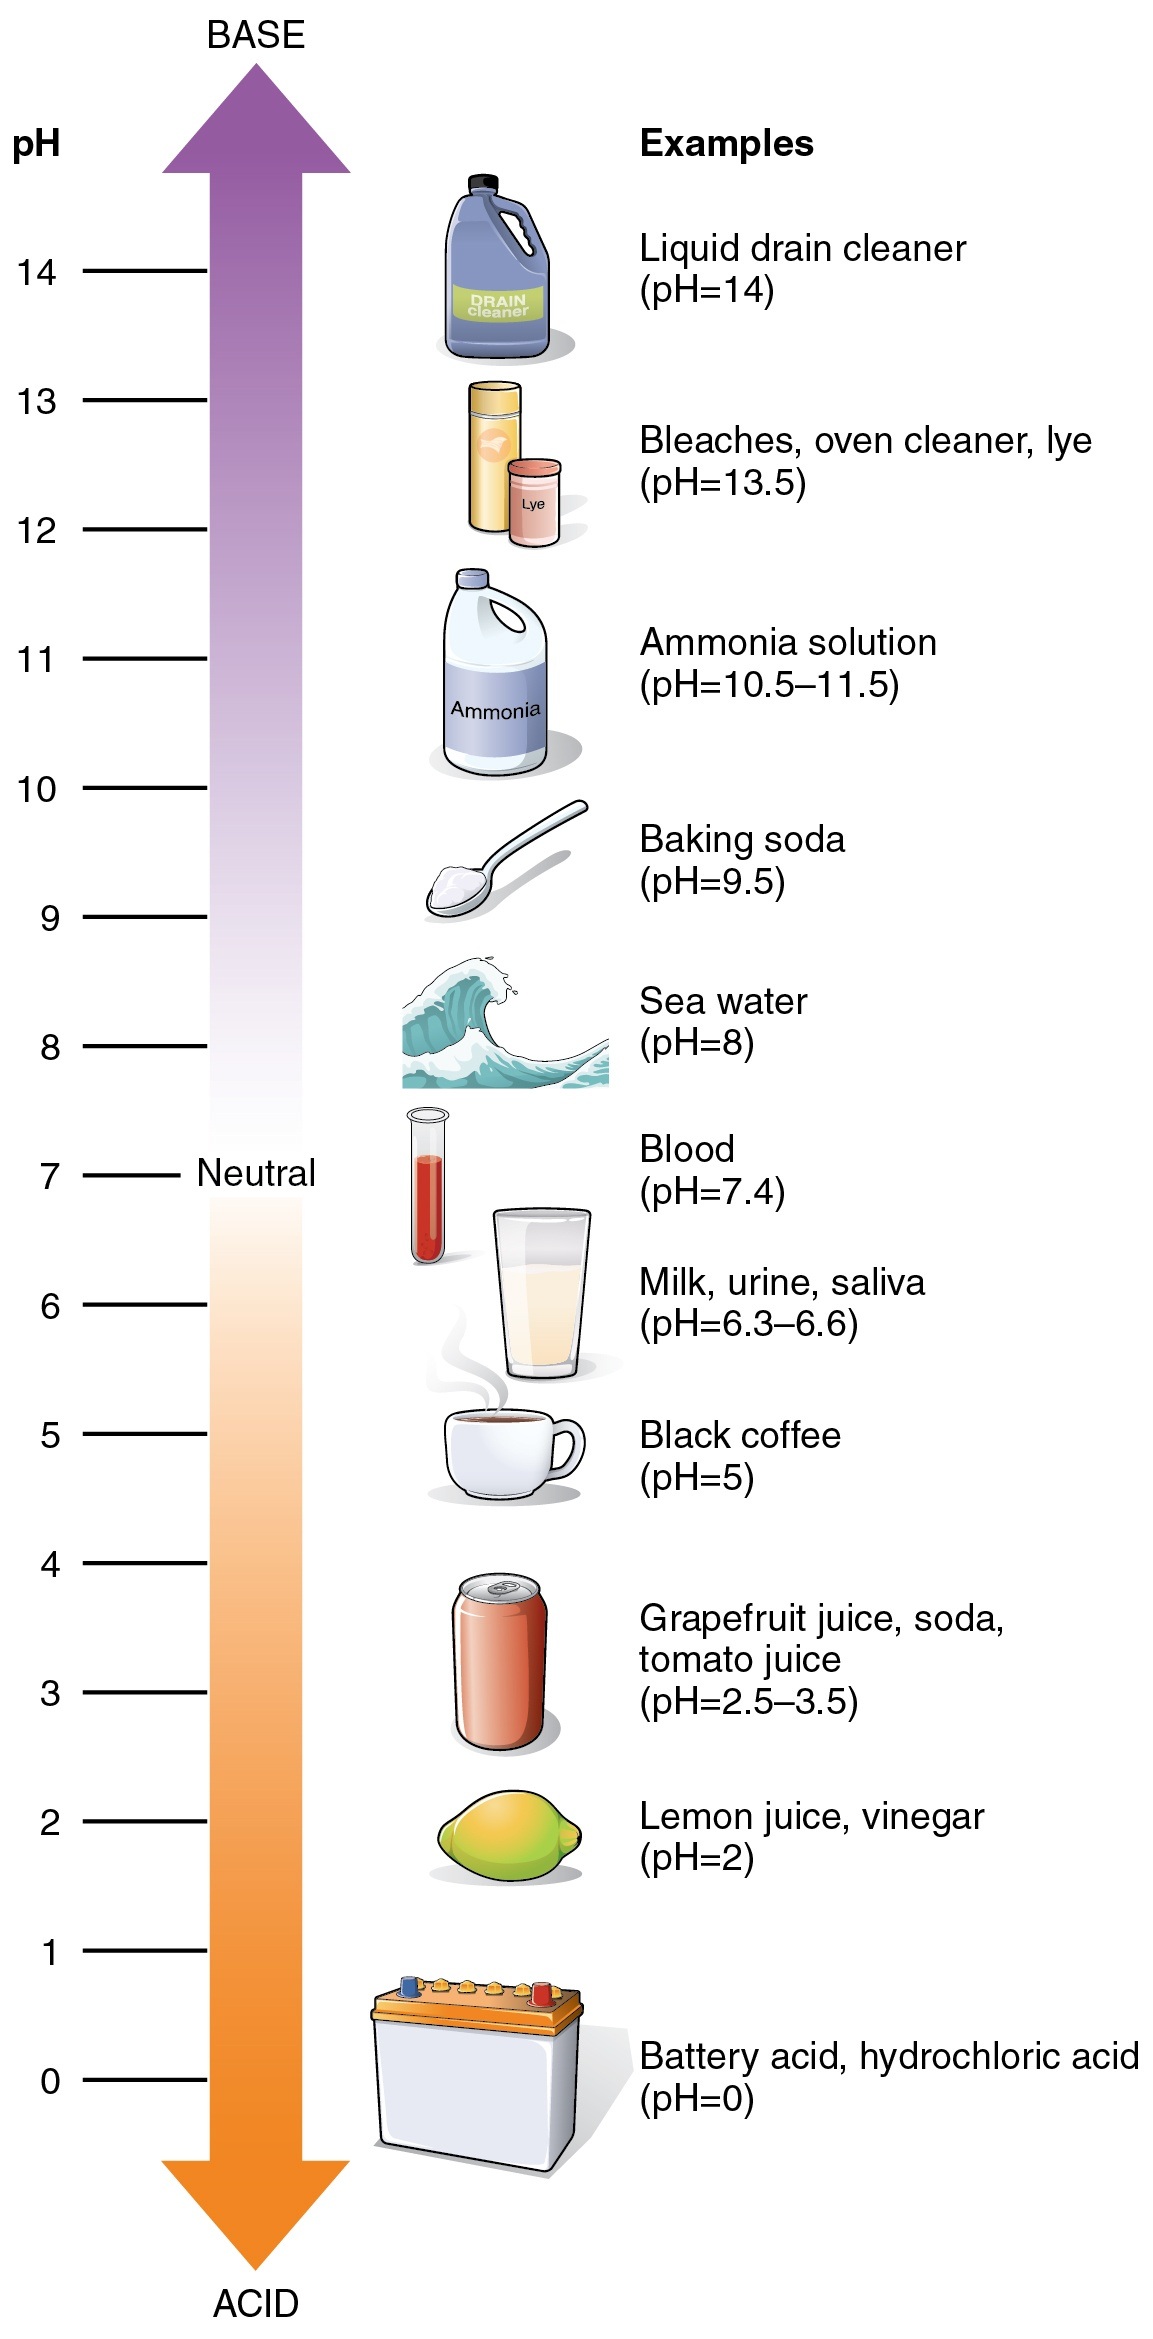 Common Acids and alkalis